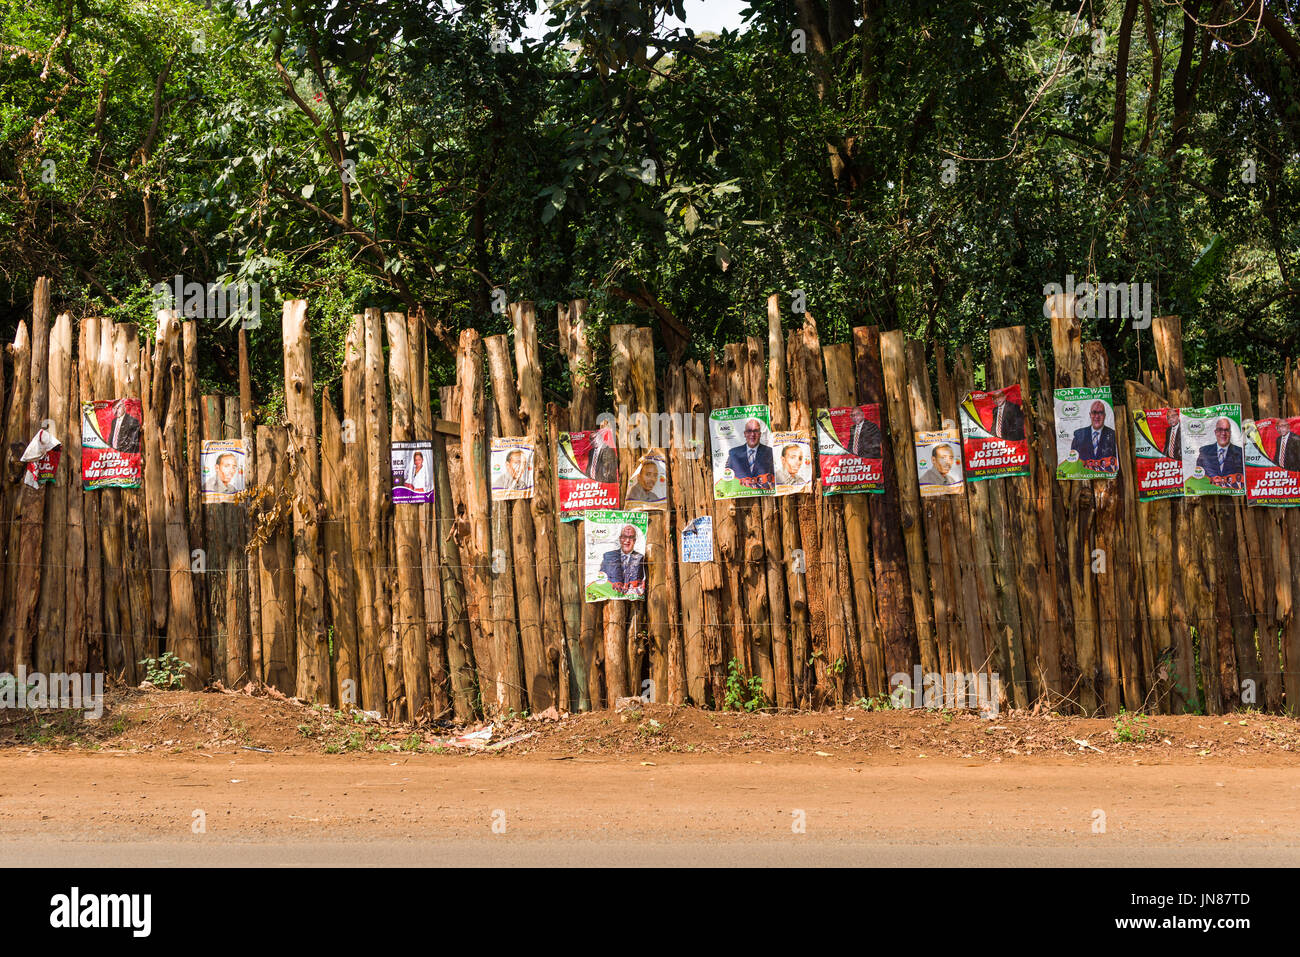 Numerous Candidate Election Posters On Wooden Wall By Roadside, Nairobi, Kenya Stock Photo